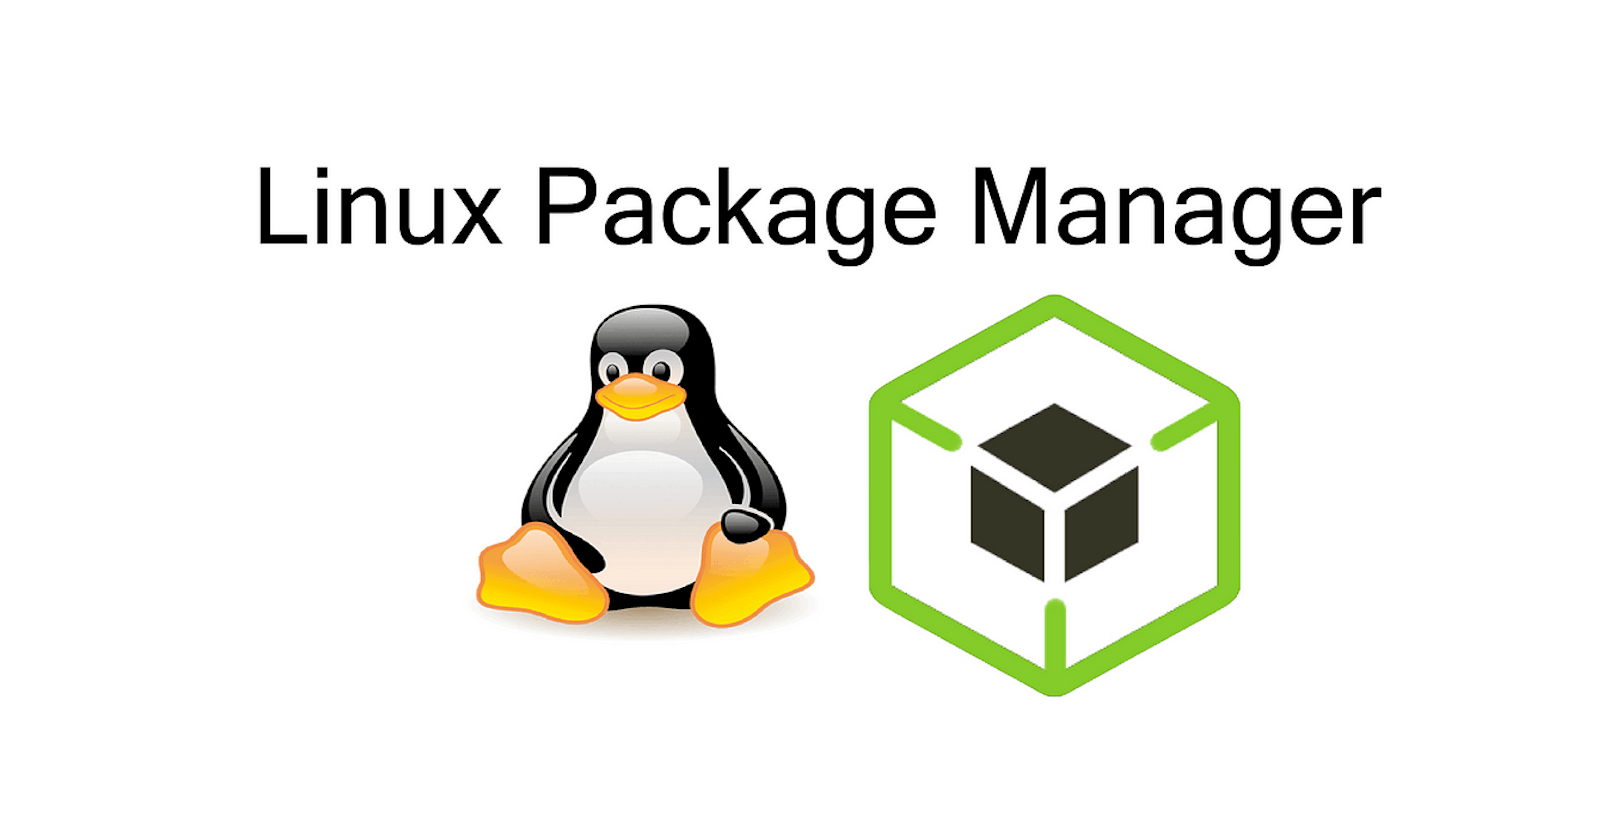 #Day 7 - Understanding package manager and systemctl